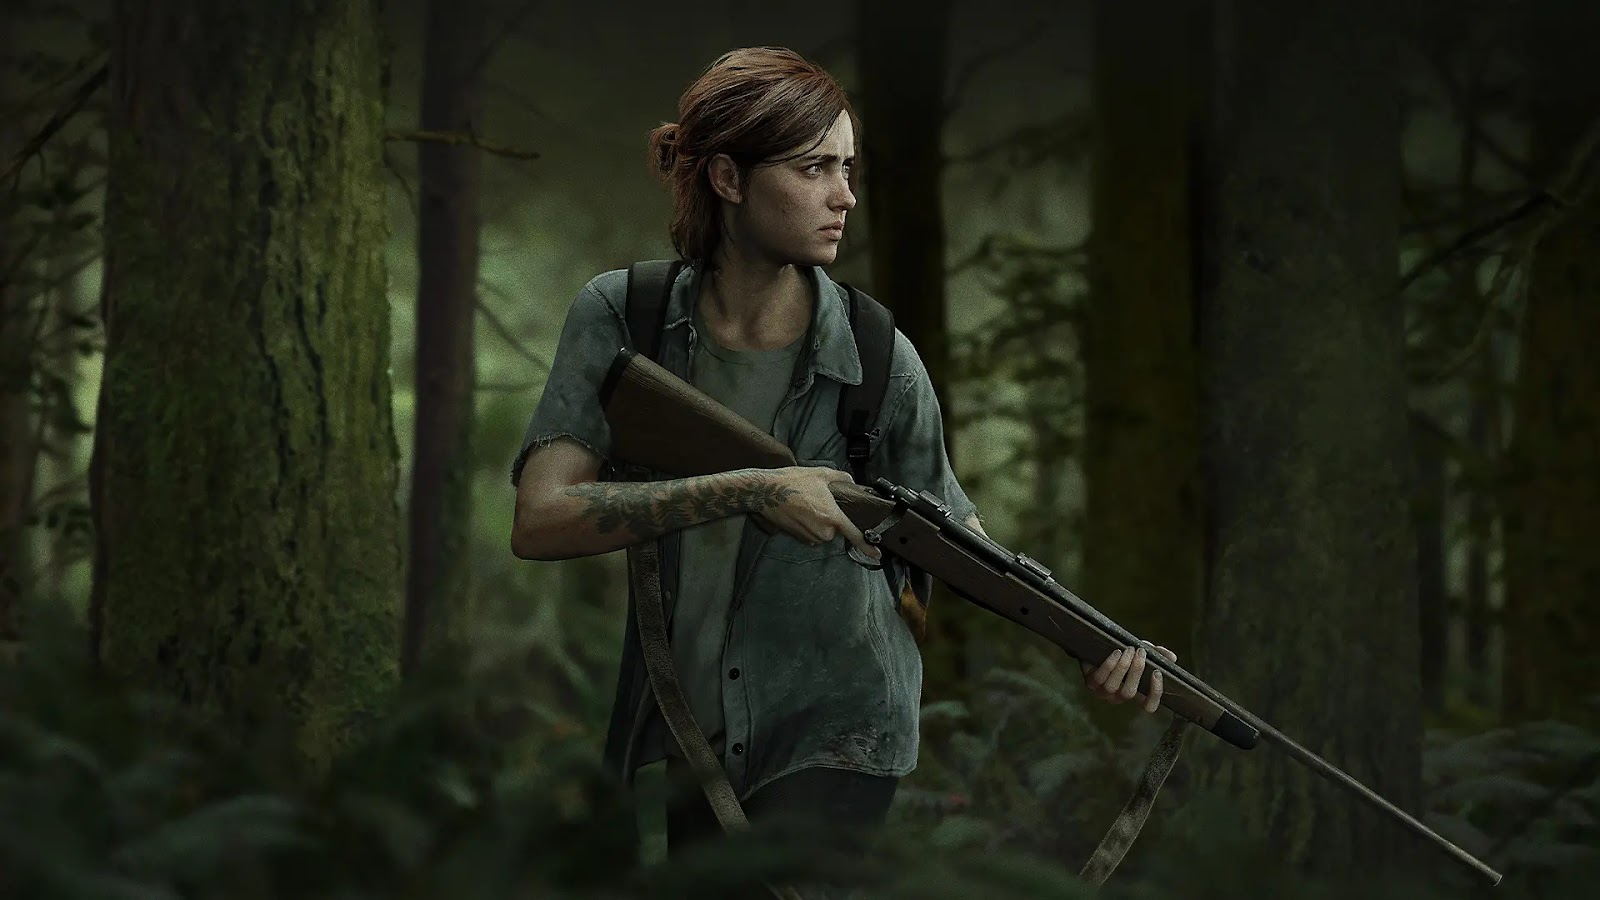 Promotional artwork of Ellie from The Last of Us Part 2 